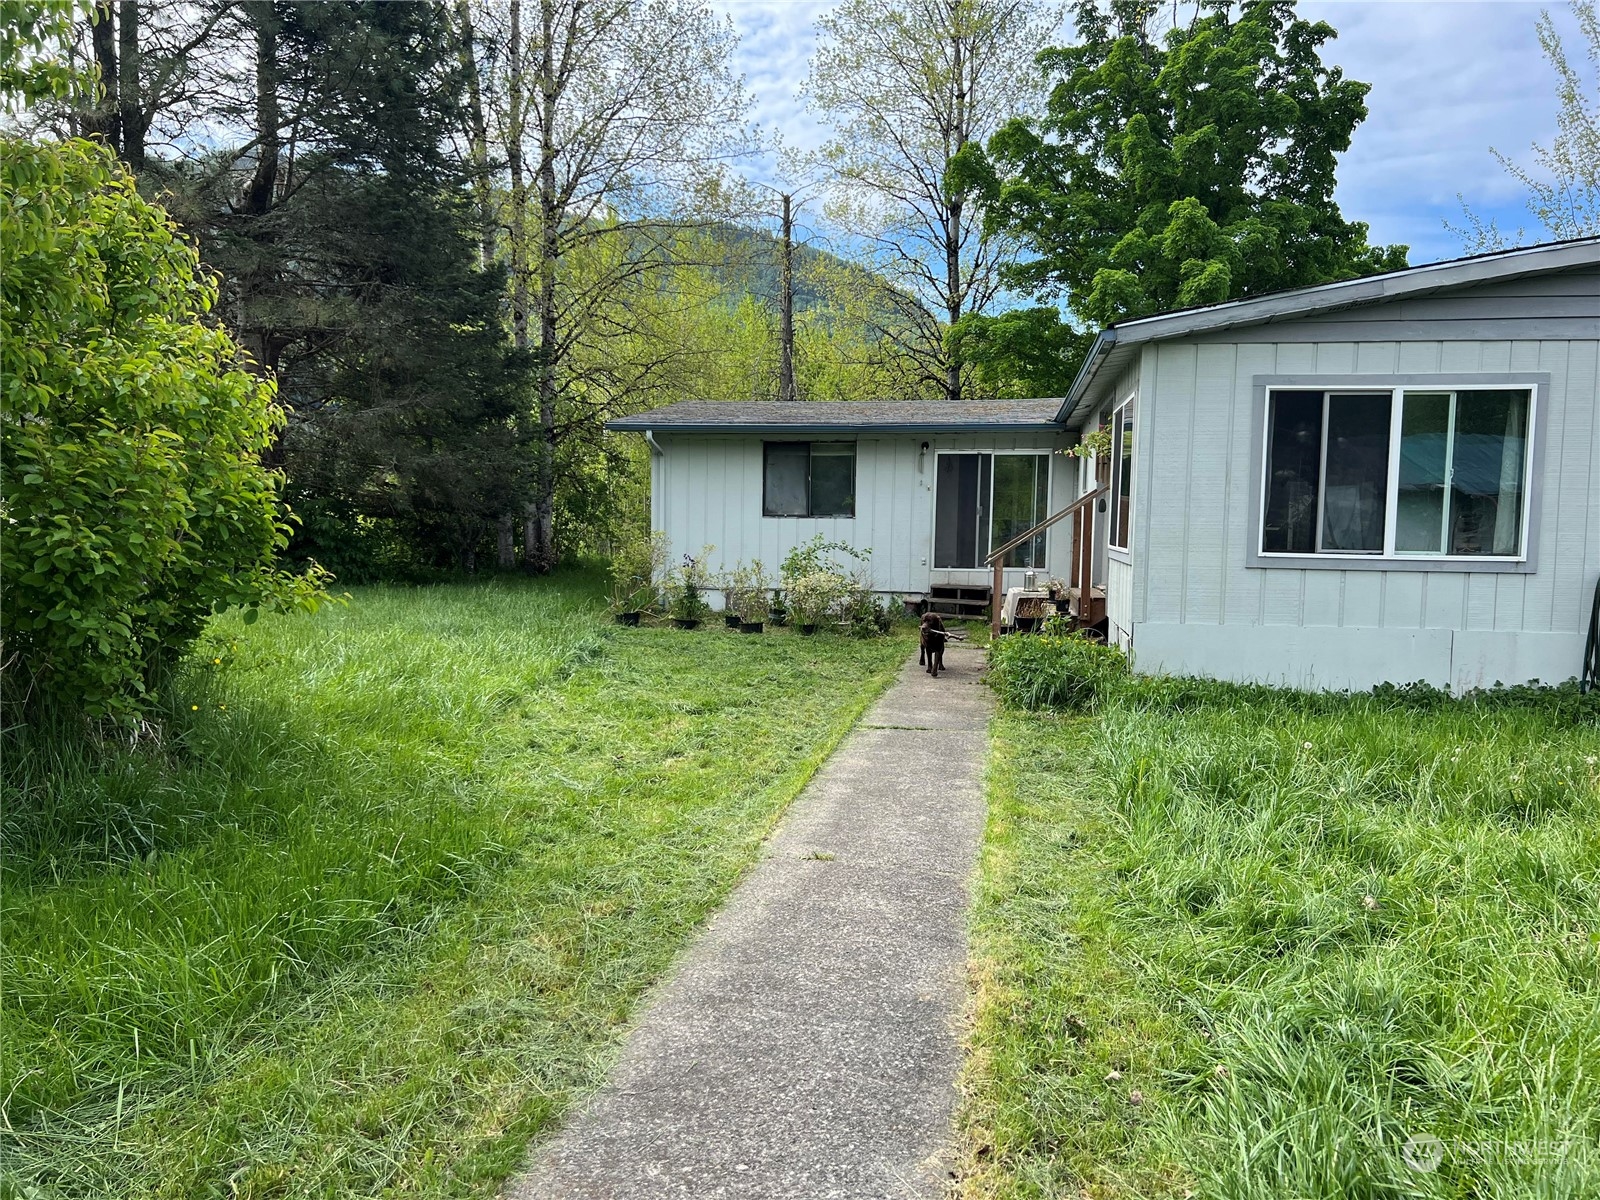 a view of a yard in front of house